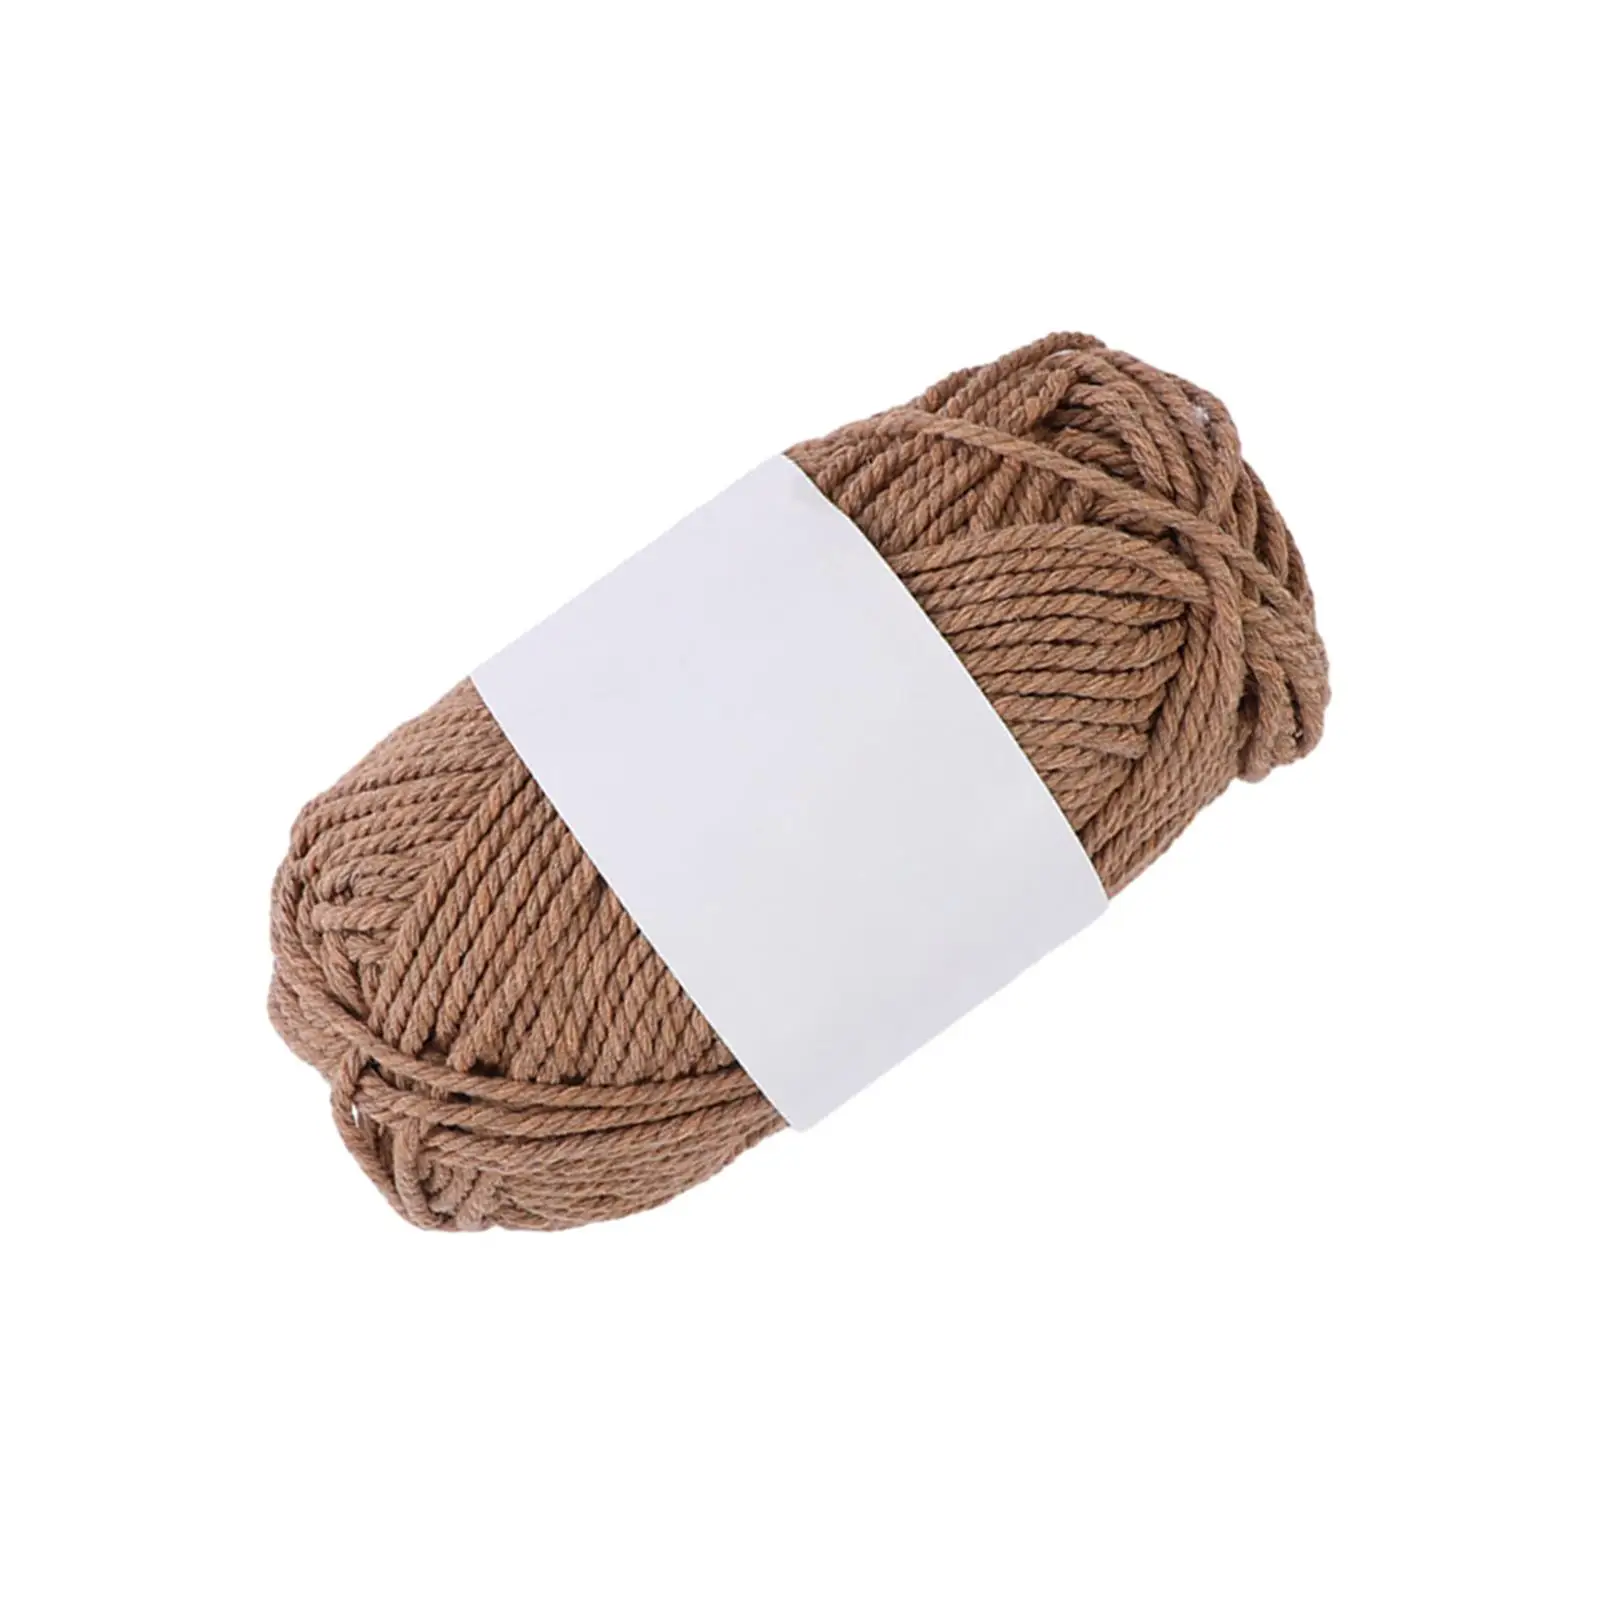 Knitting Yarn Crafts Hand Knitting Supplies Adults Lightweight Knitting Thread for Beginners Hand Needlework Gloves Hats Scarves